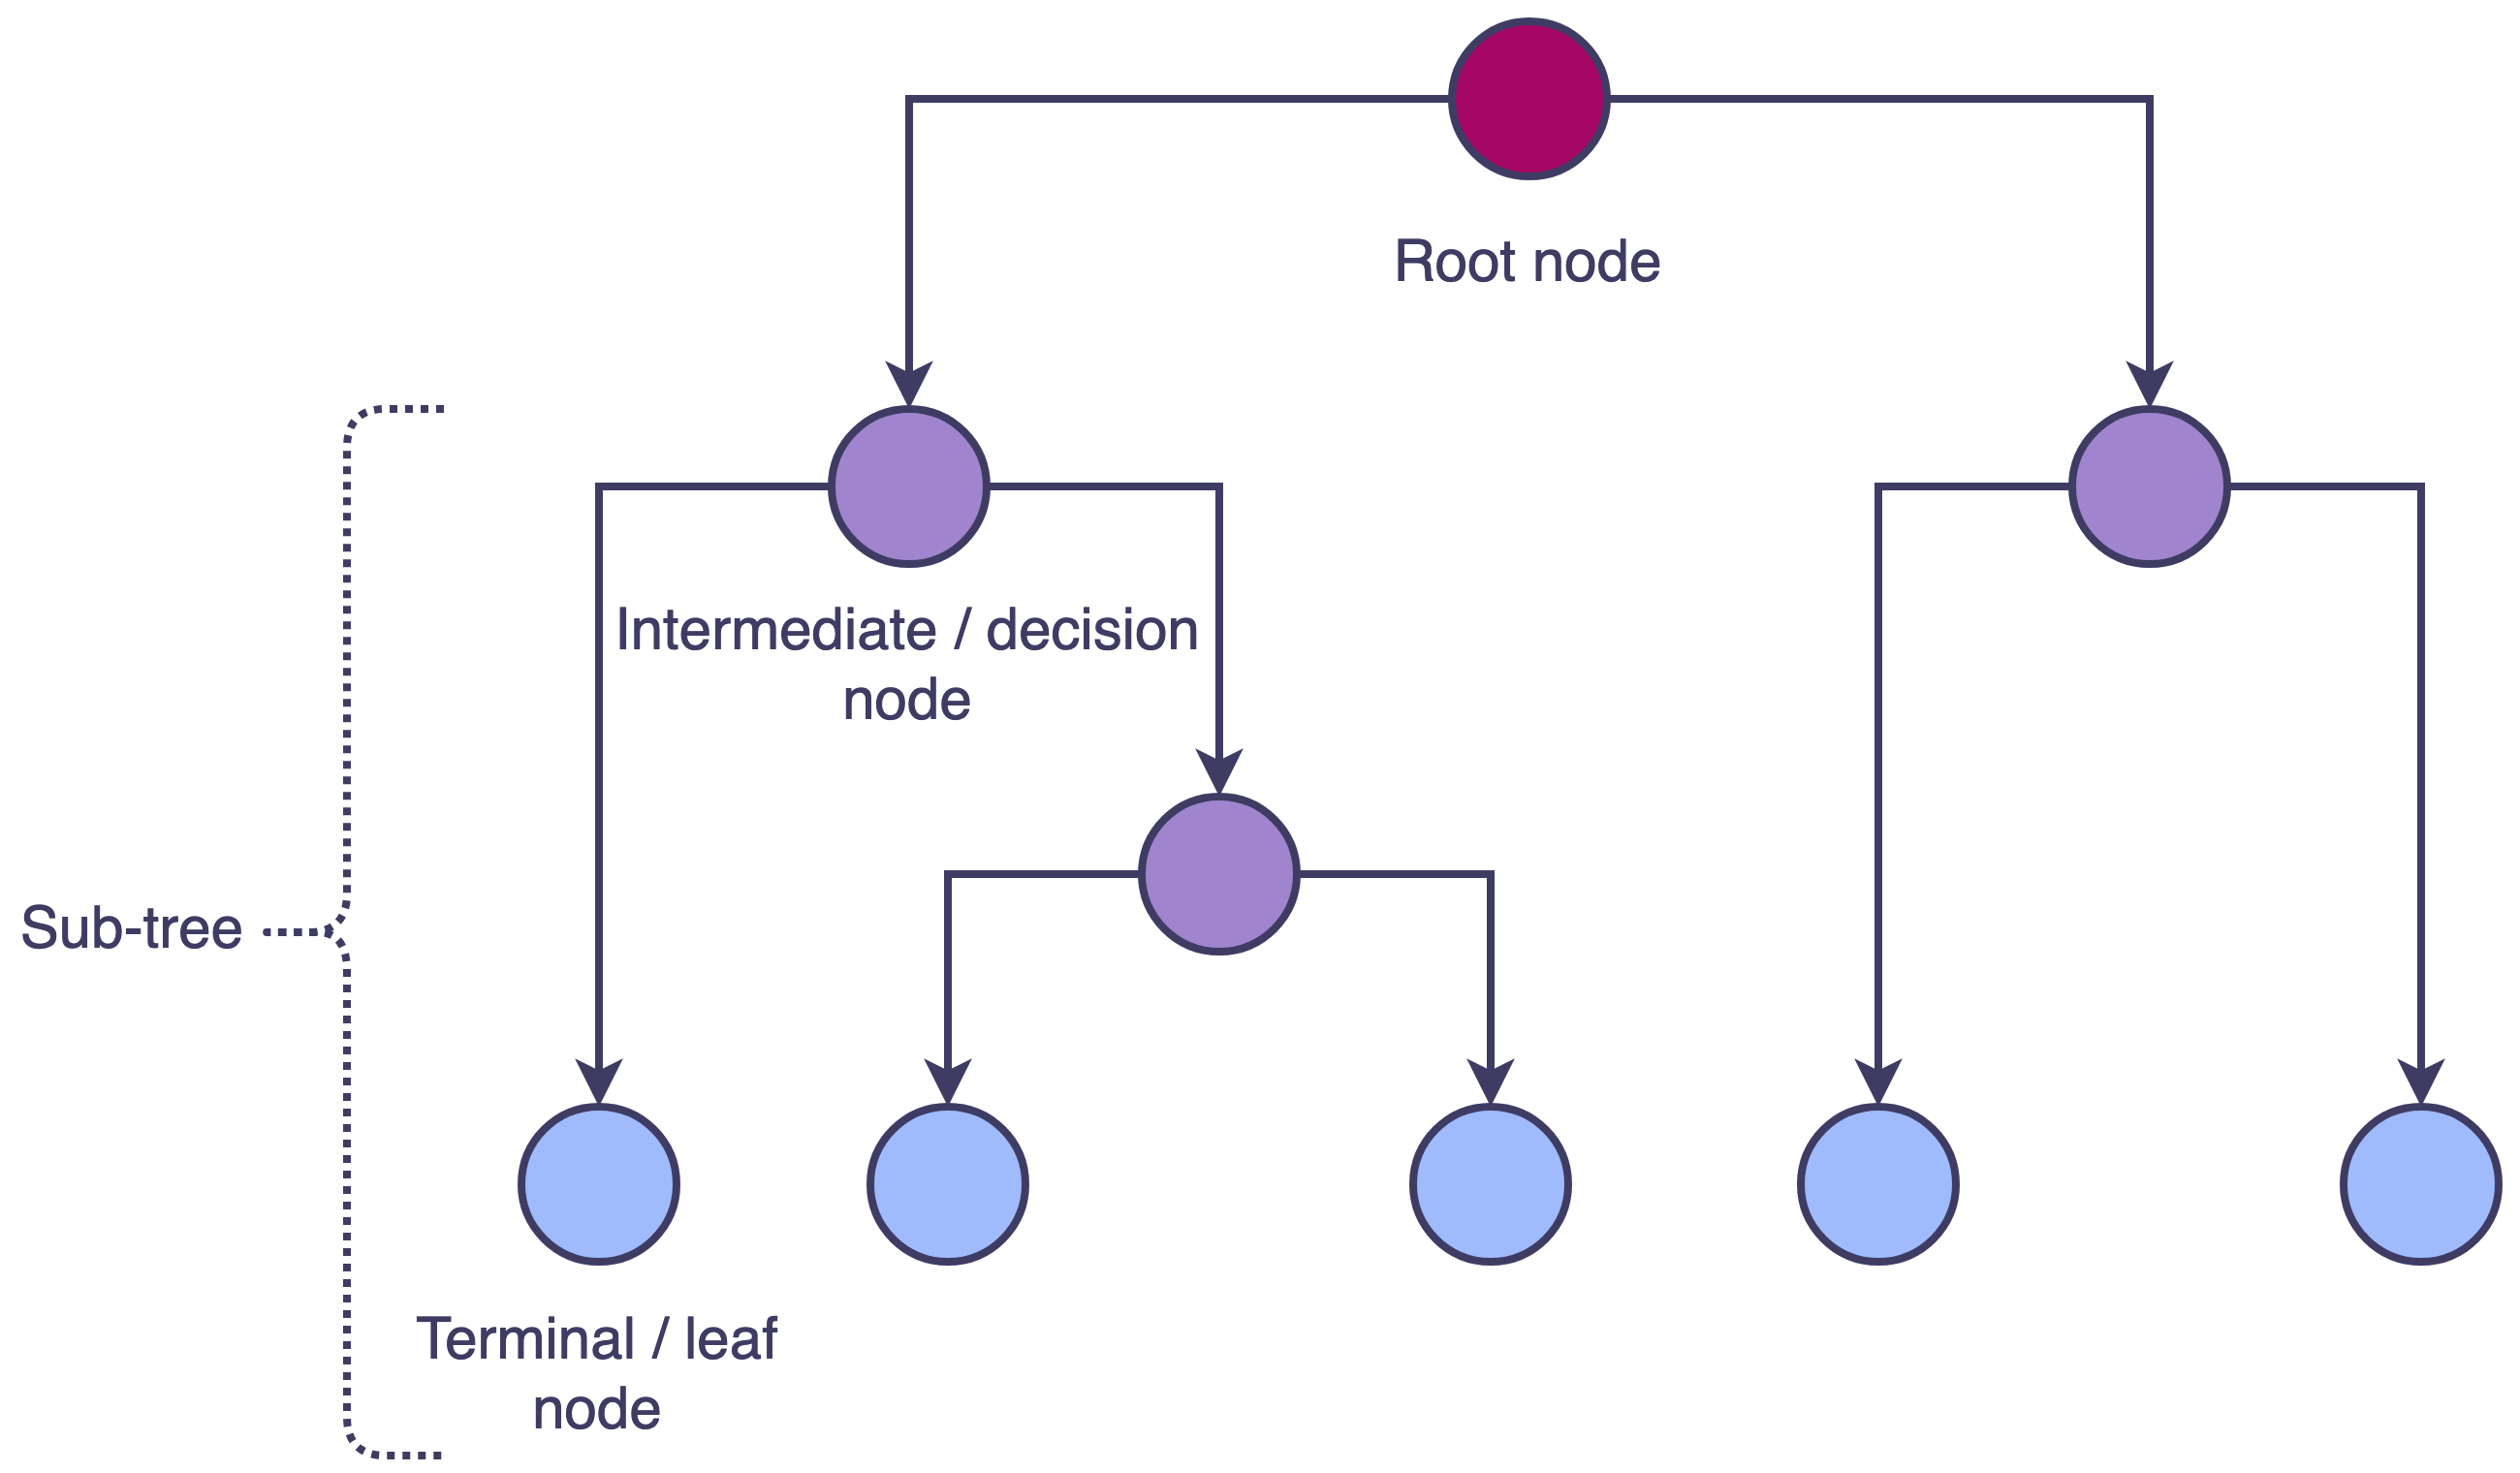 Figure 1 shows a diagram of a decision tree structure where the initial or root node is split into two branches. Subsequently split nodes are called intermediate or decision nodes with each split also resulting in two branches. Unsplit nodes are called terminal or leaf nodes and any subset of connected nodes is called a sub-tree.